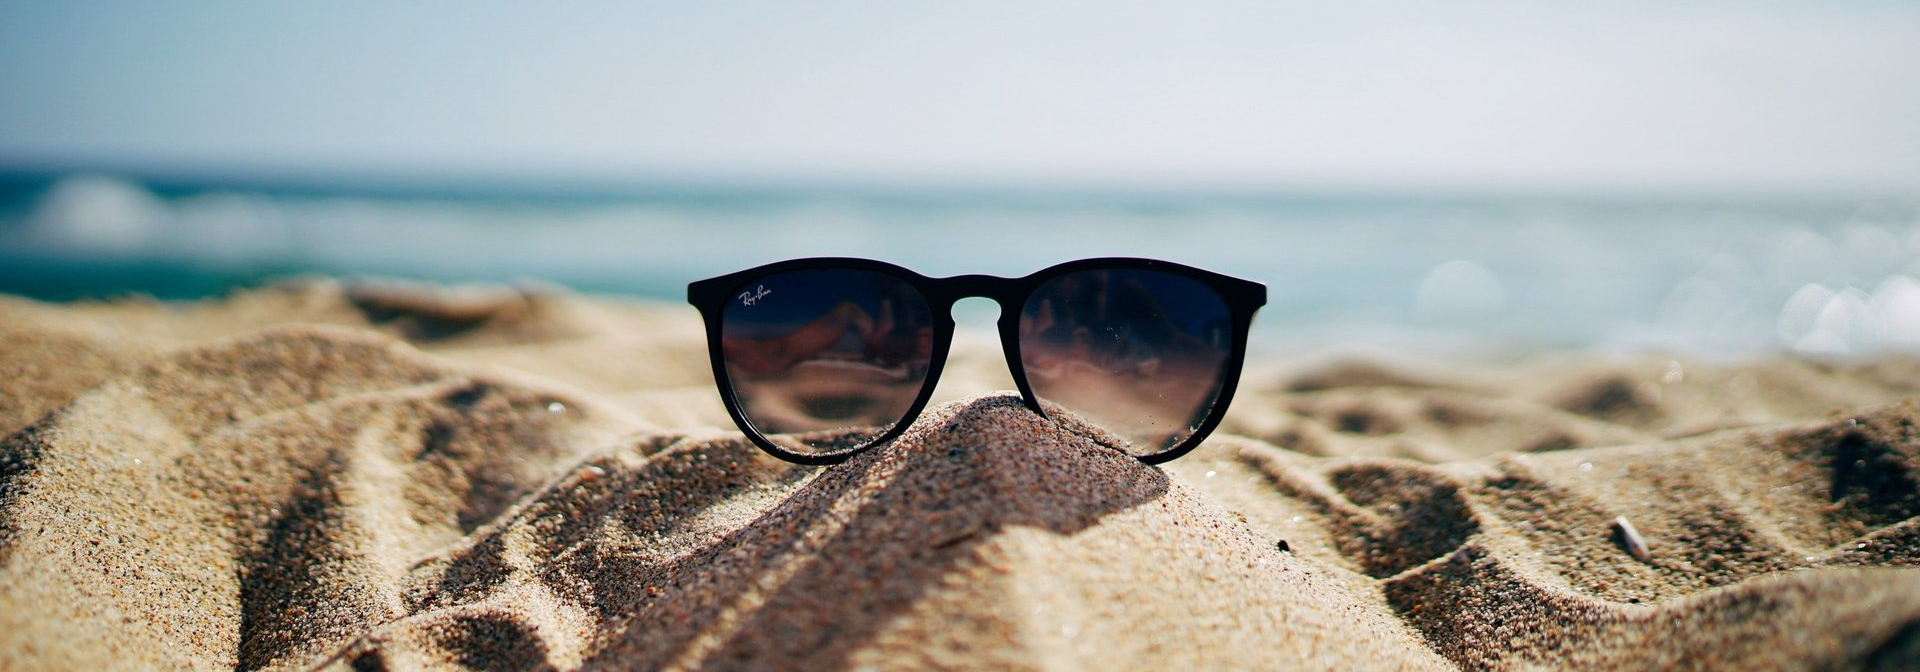 Sunglasses in Sand at Beach